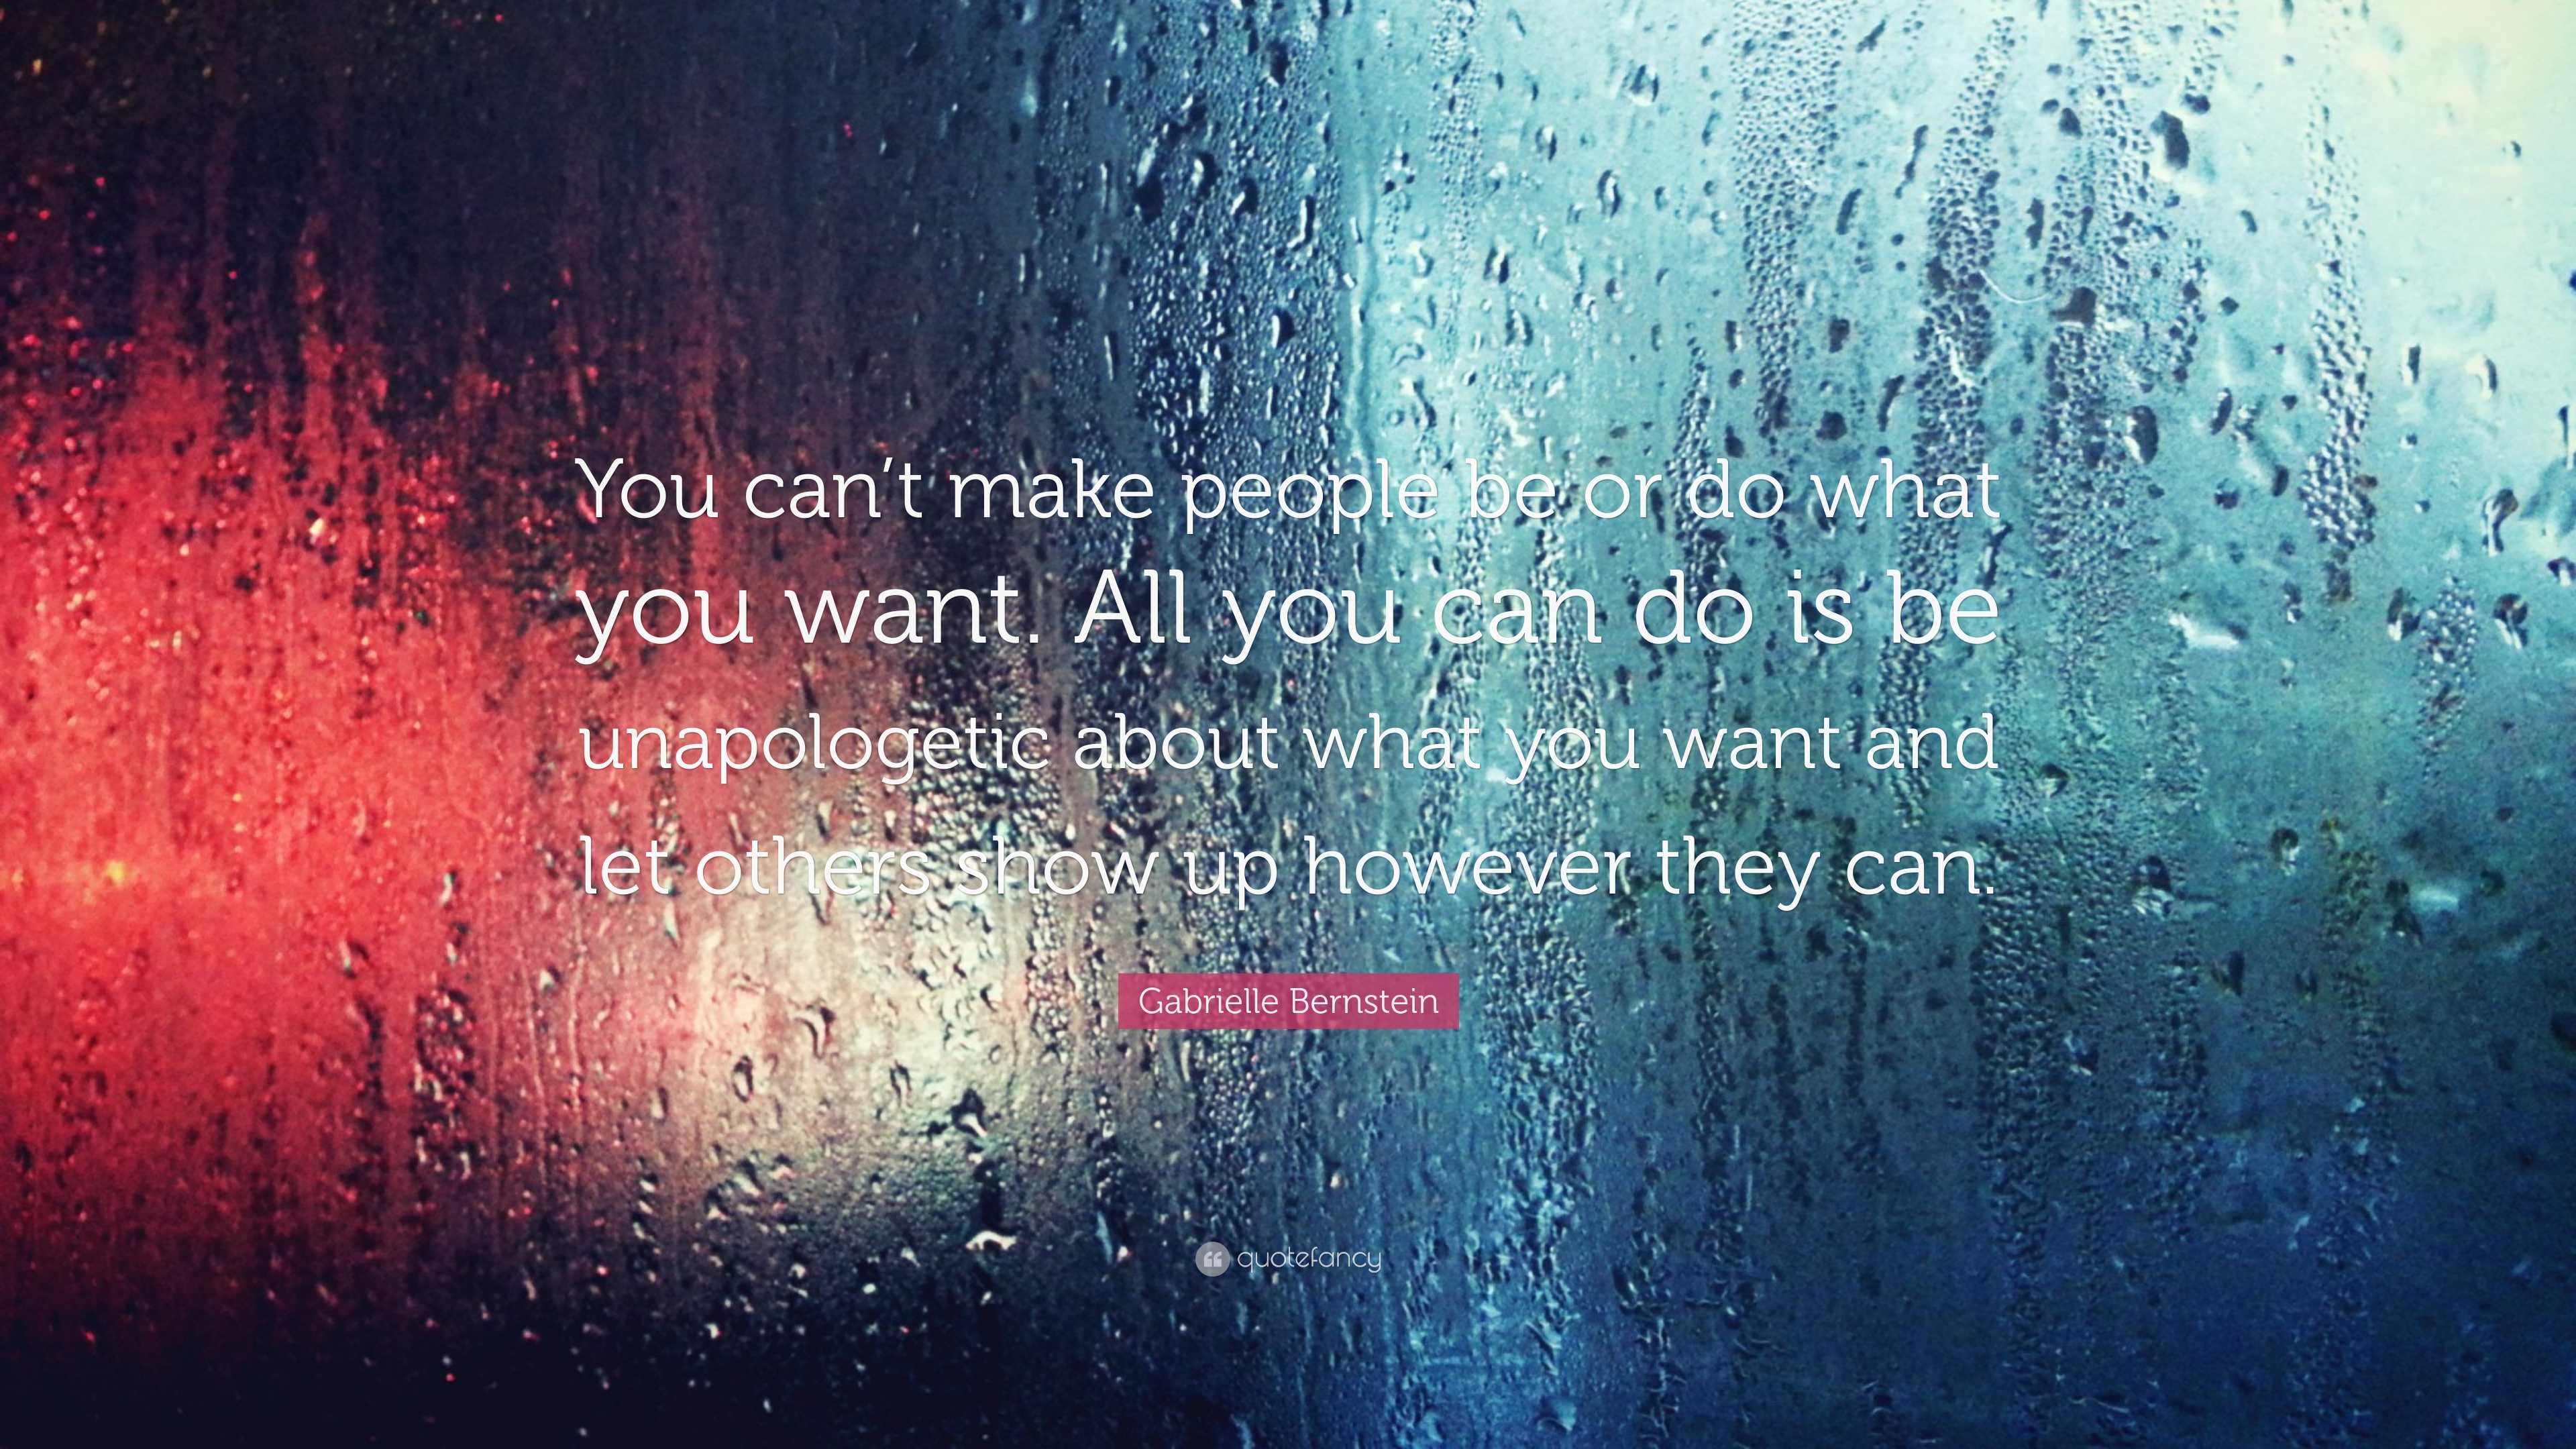 Gabrielle Bernstein Quote: “You can’t make people be or do what you ...